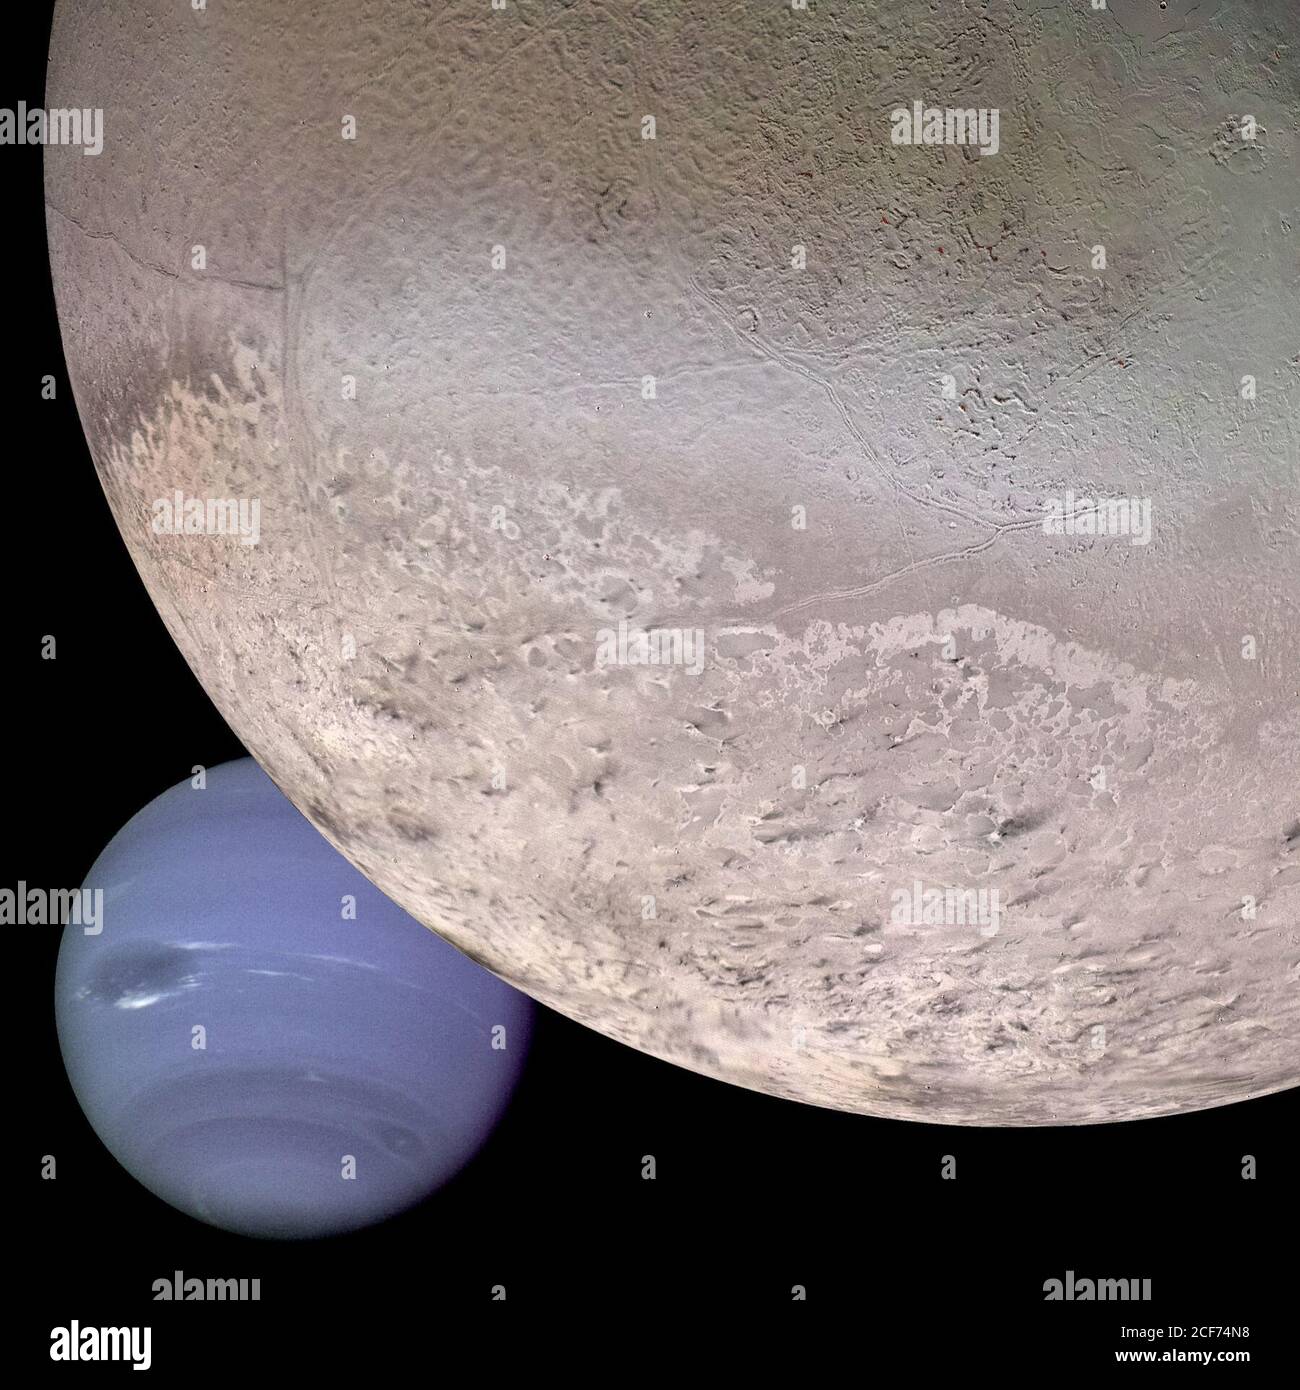 This computer generated montage shows Neptune as it would appear from a spacecraft approaching Triton, Neptune's largest moon at 2706 km (1683 mi) in diameter. The wind and sublimation eroded south polar cap of Triton is shown at the bottom of the Triton image, a cryovolcanic terrain at the upper right, and the enigmatic 'cantaloupe terrain' at the upper left. Triton's surface is mostly covered by nitrogen frost mixed with traces of condensed methane, carbon dioxide, and carbon monoxide. The tenuous atmosphere of Triton, though only about one hundredth of one percent of Earth's atmospheric den Stock Photo